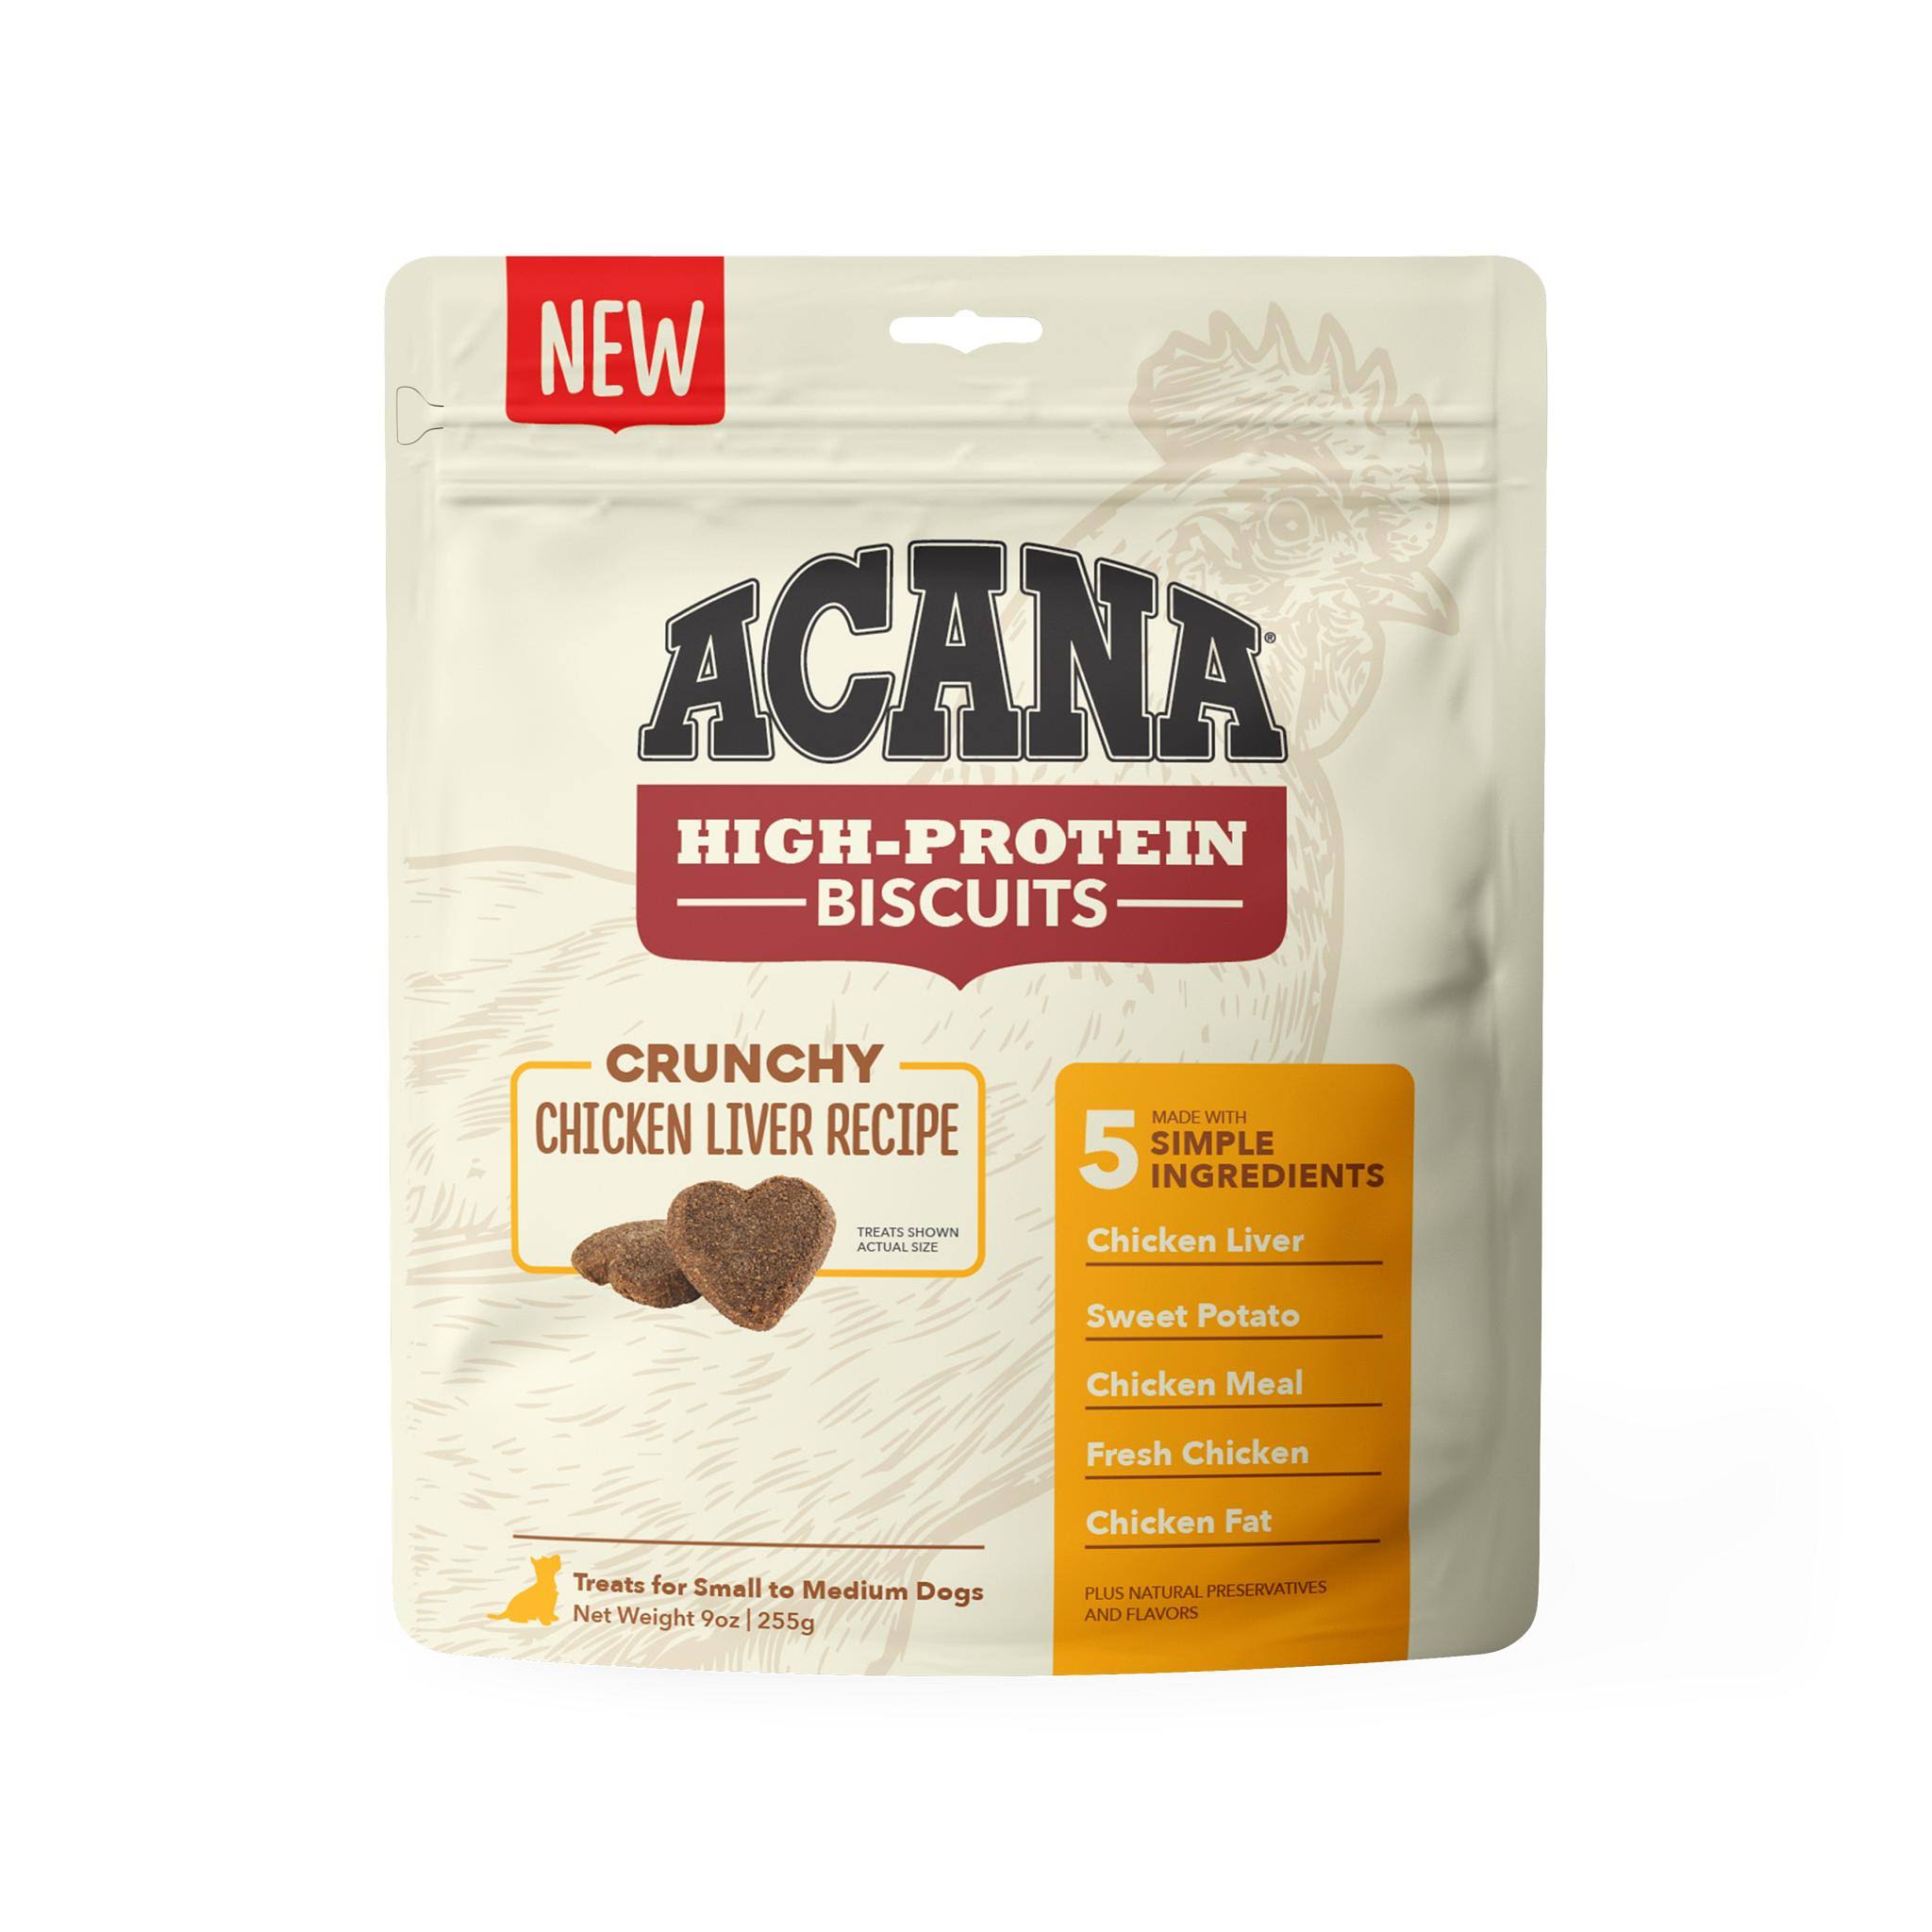 Acana Crunchy Biscuits Dog, High Protein, Treats Chicken Liver Recipe, Small - 9 oz